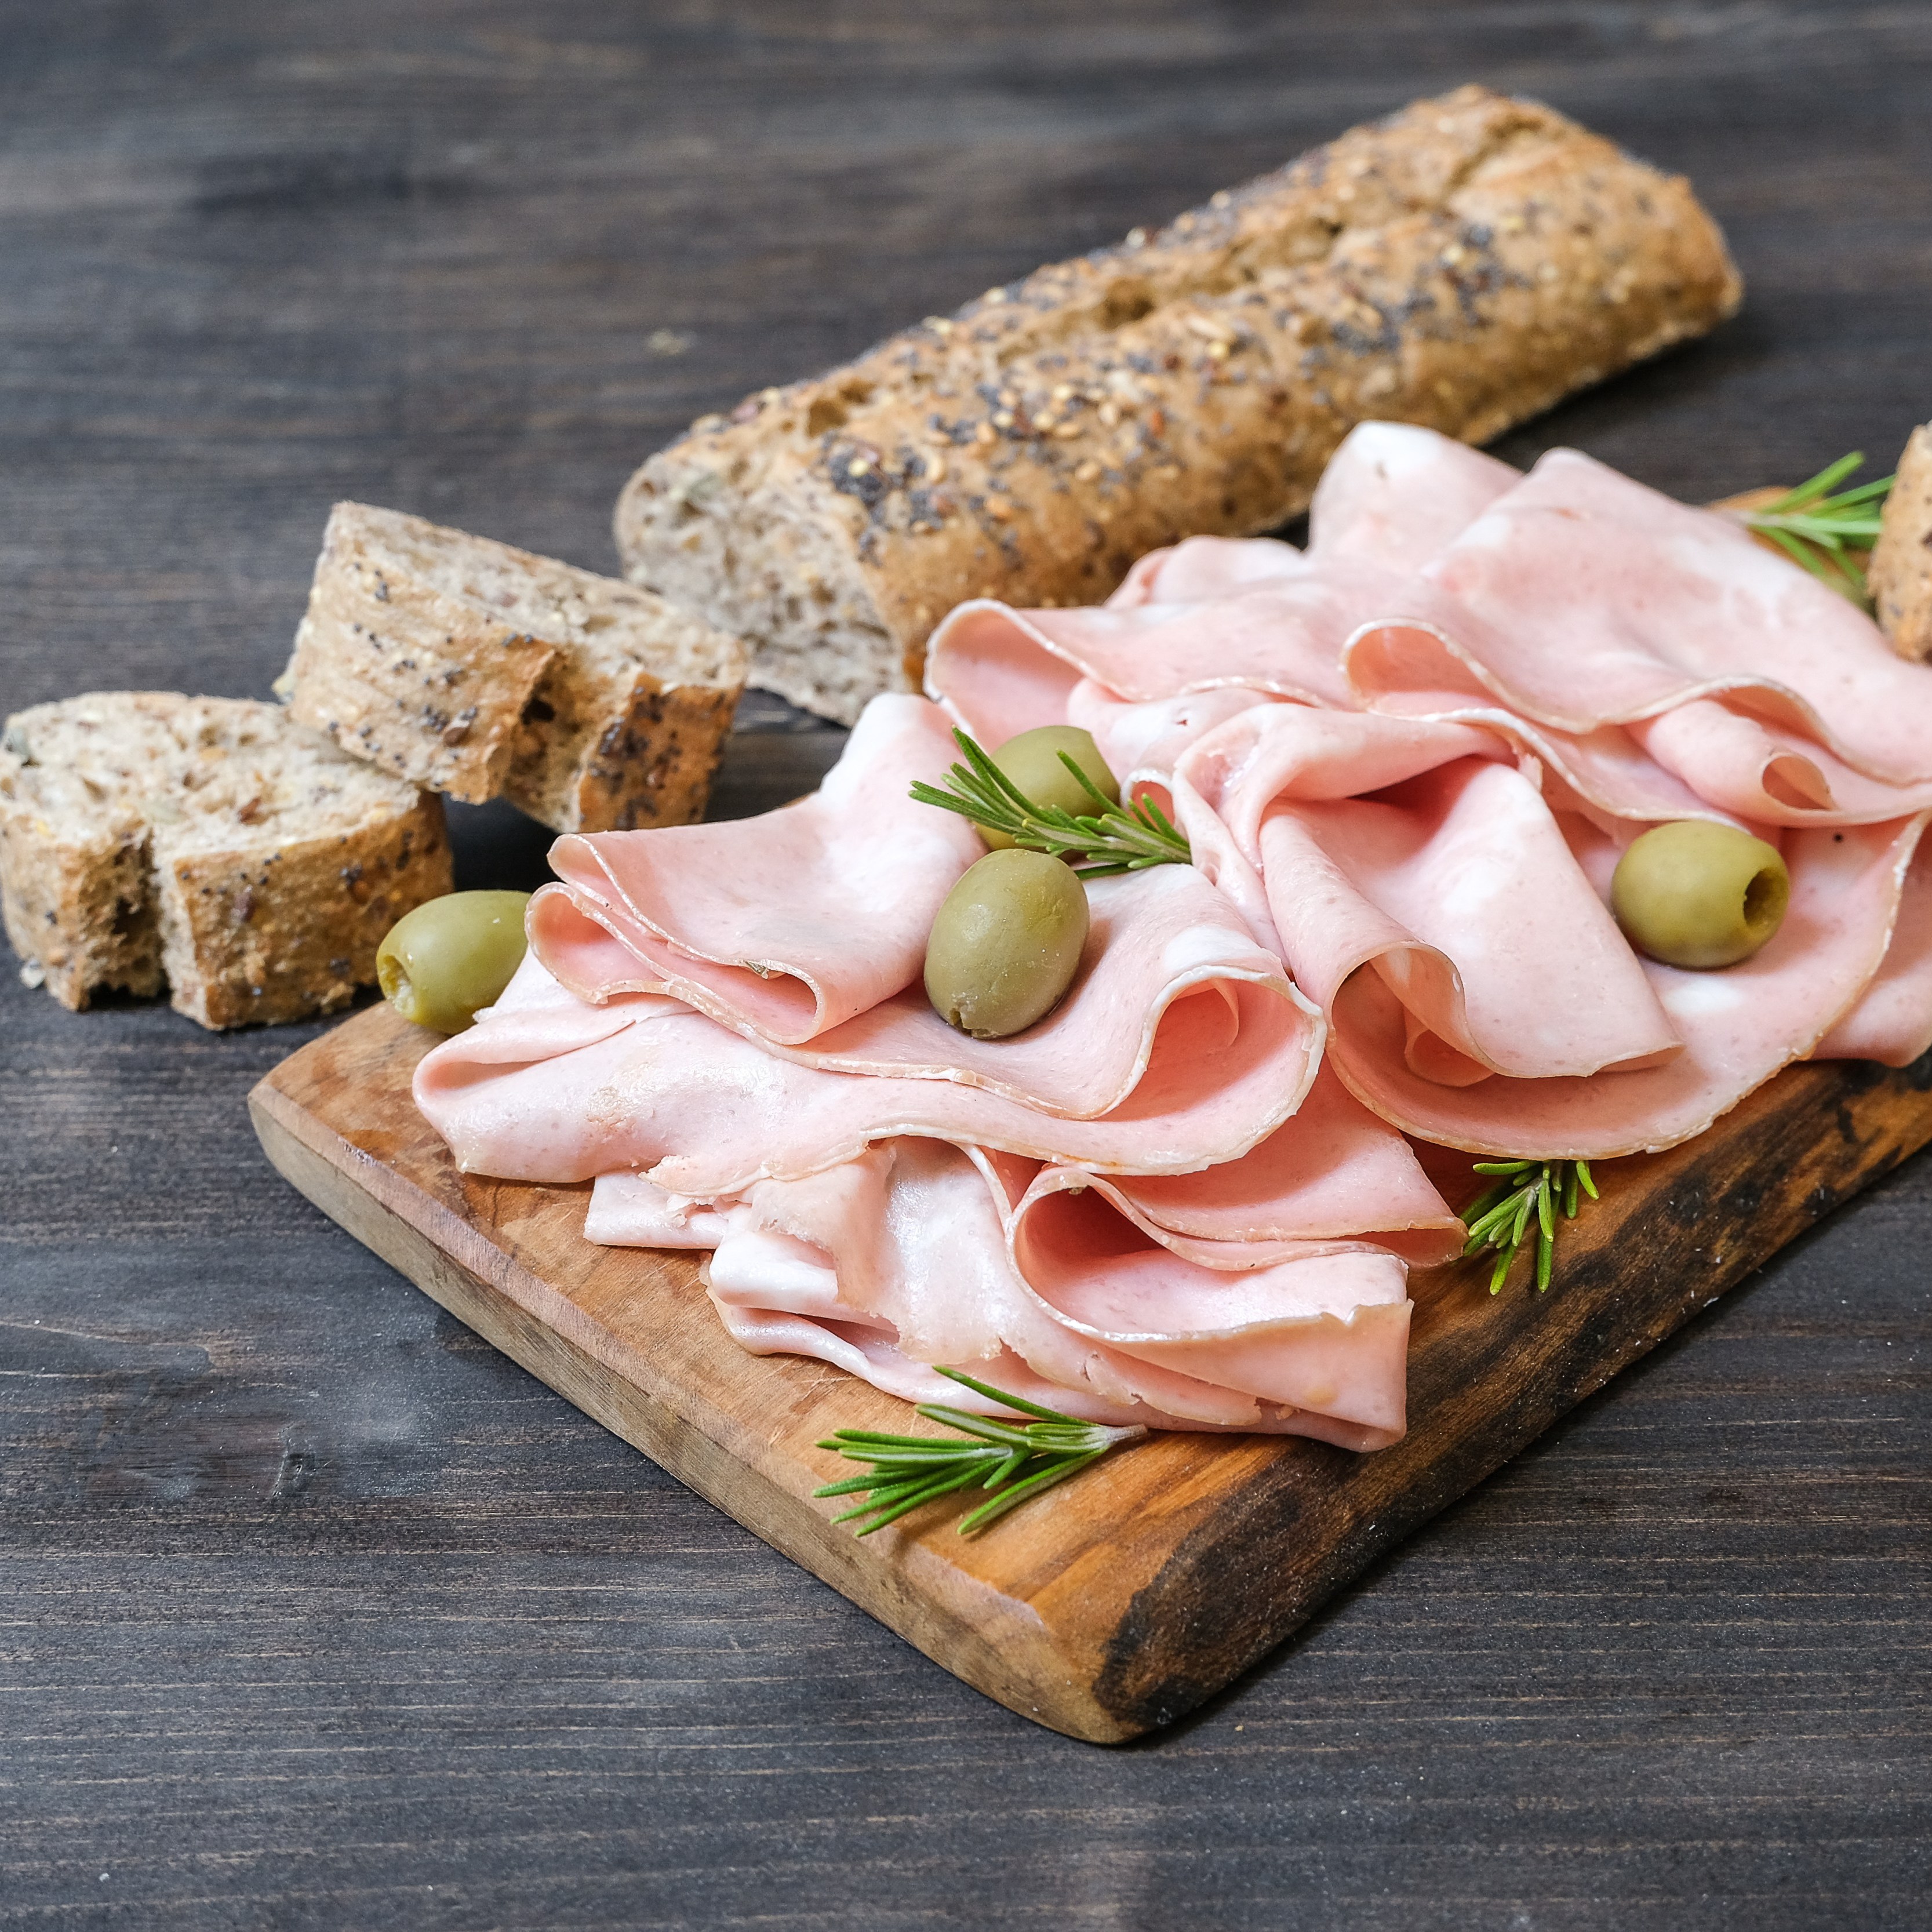 Mortadella is taking the starring role on charcuterie boards in the UK